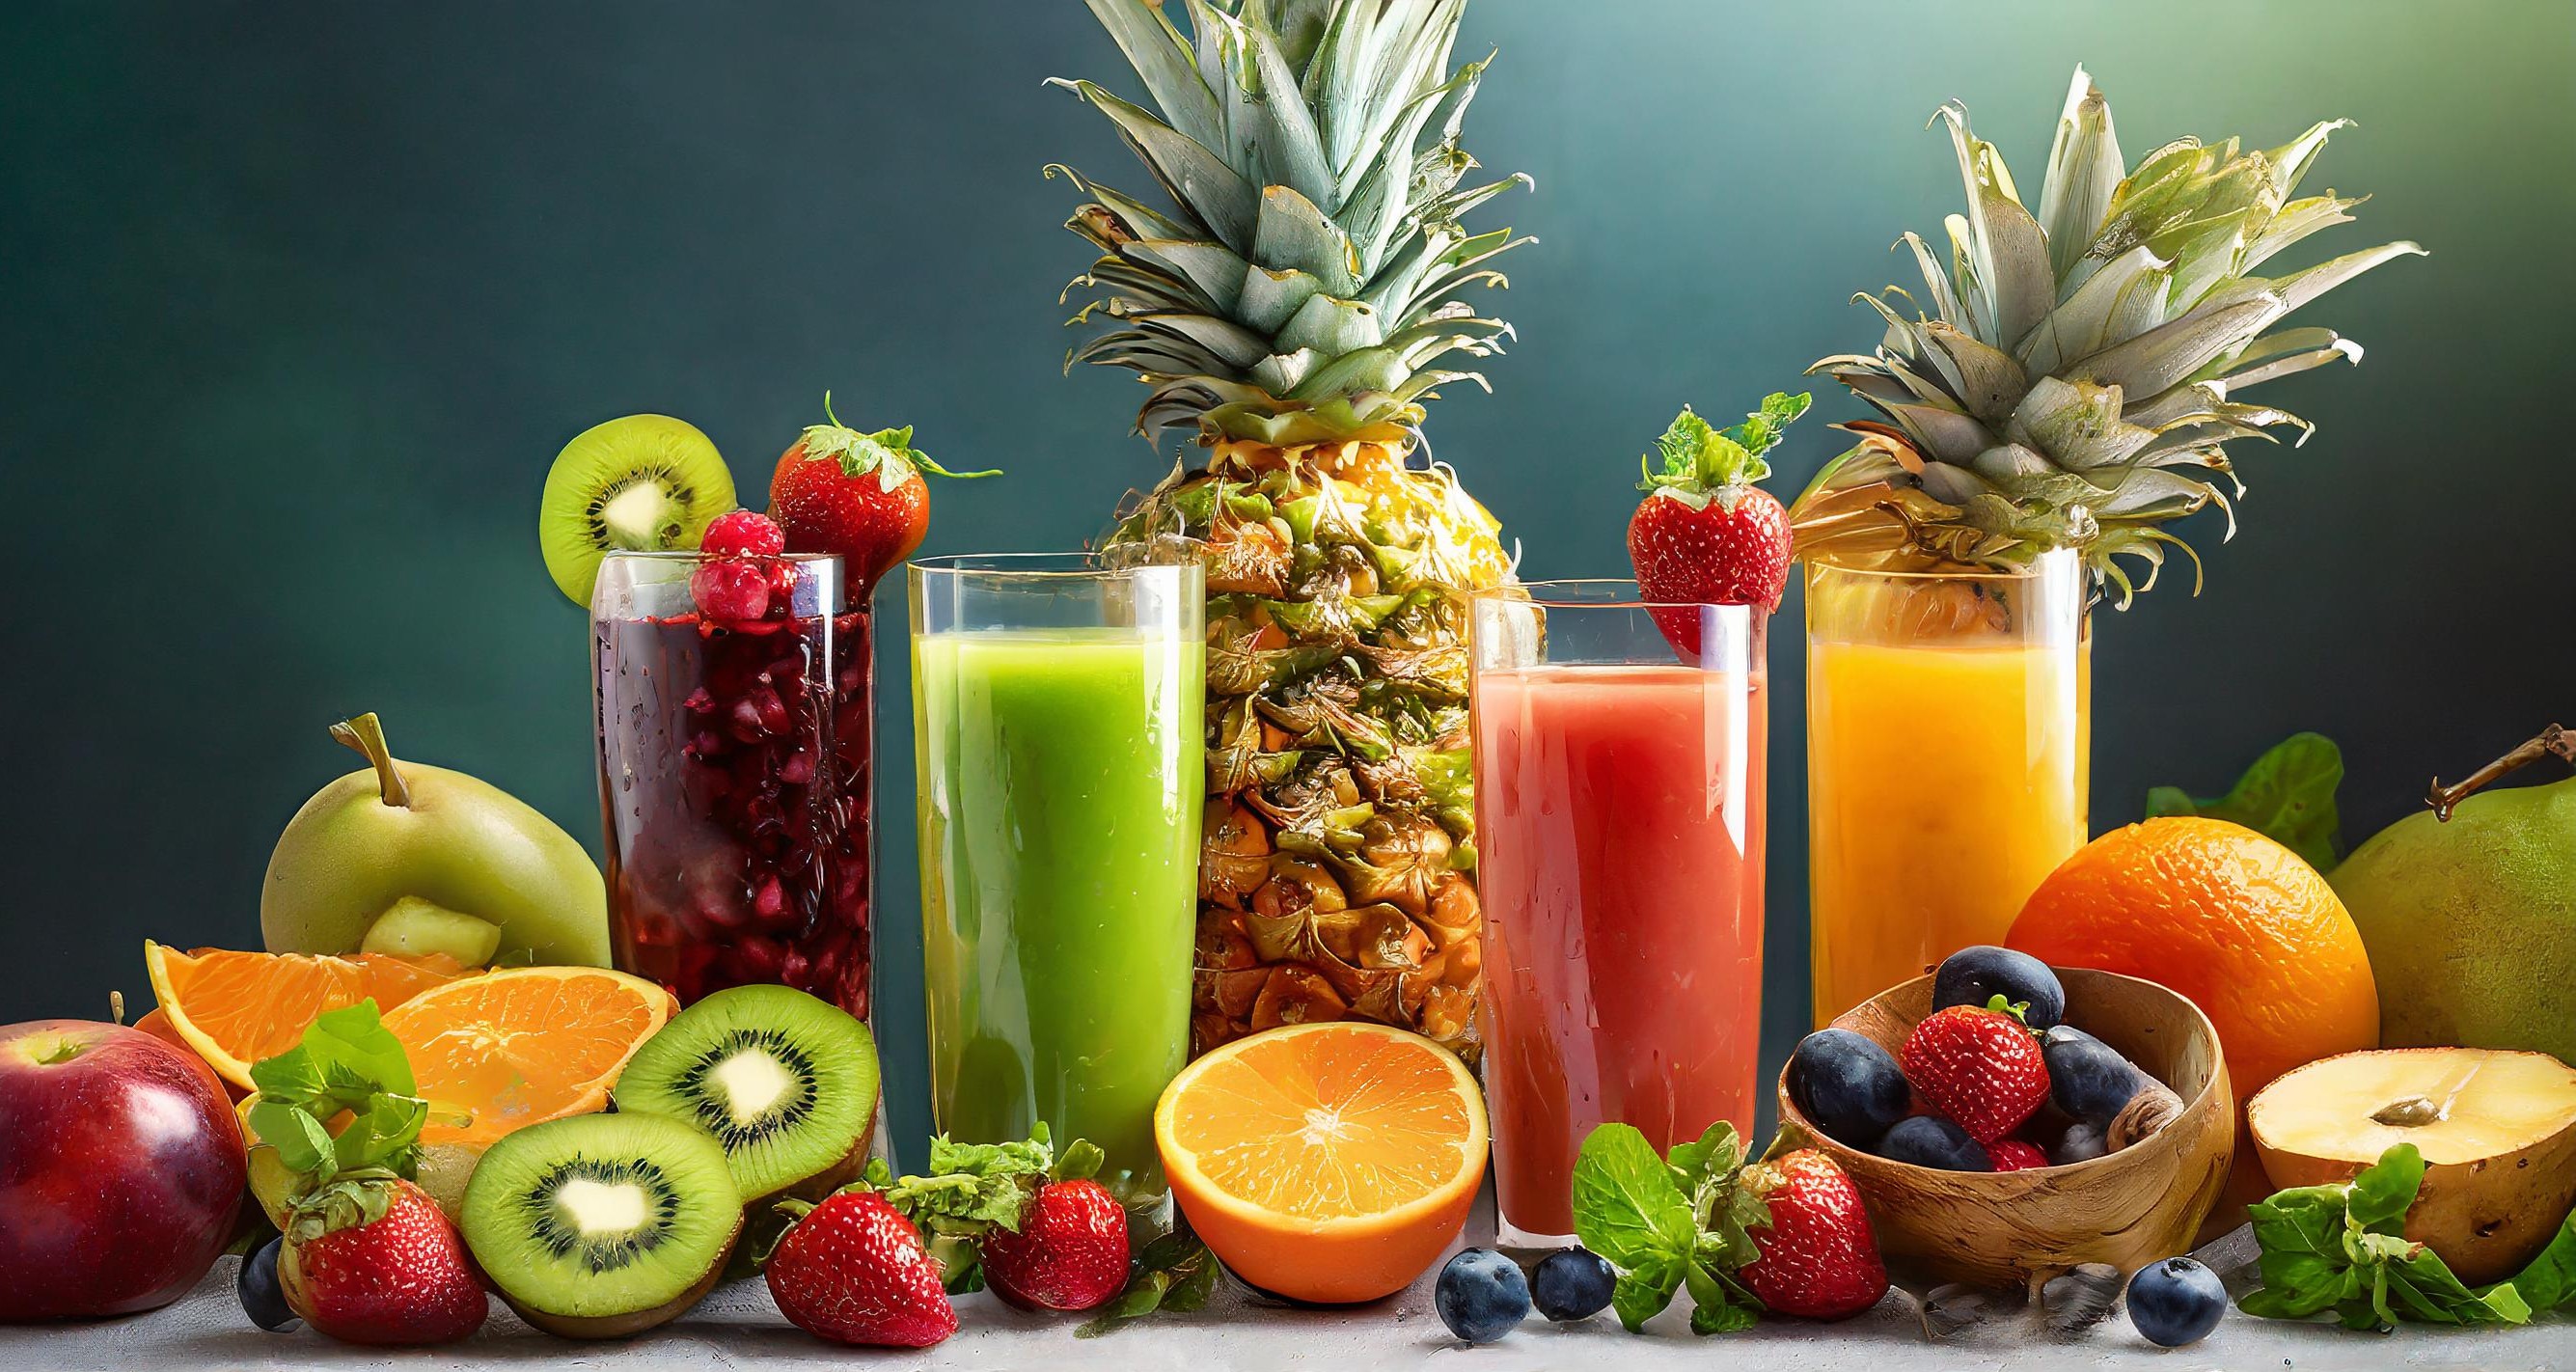 Fruits And Fruit Juices Image